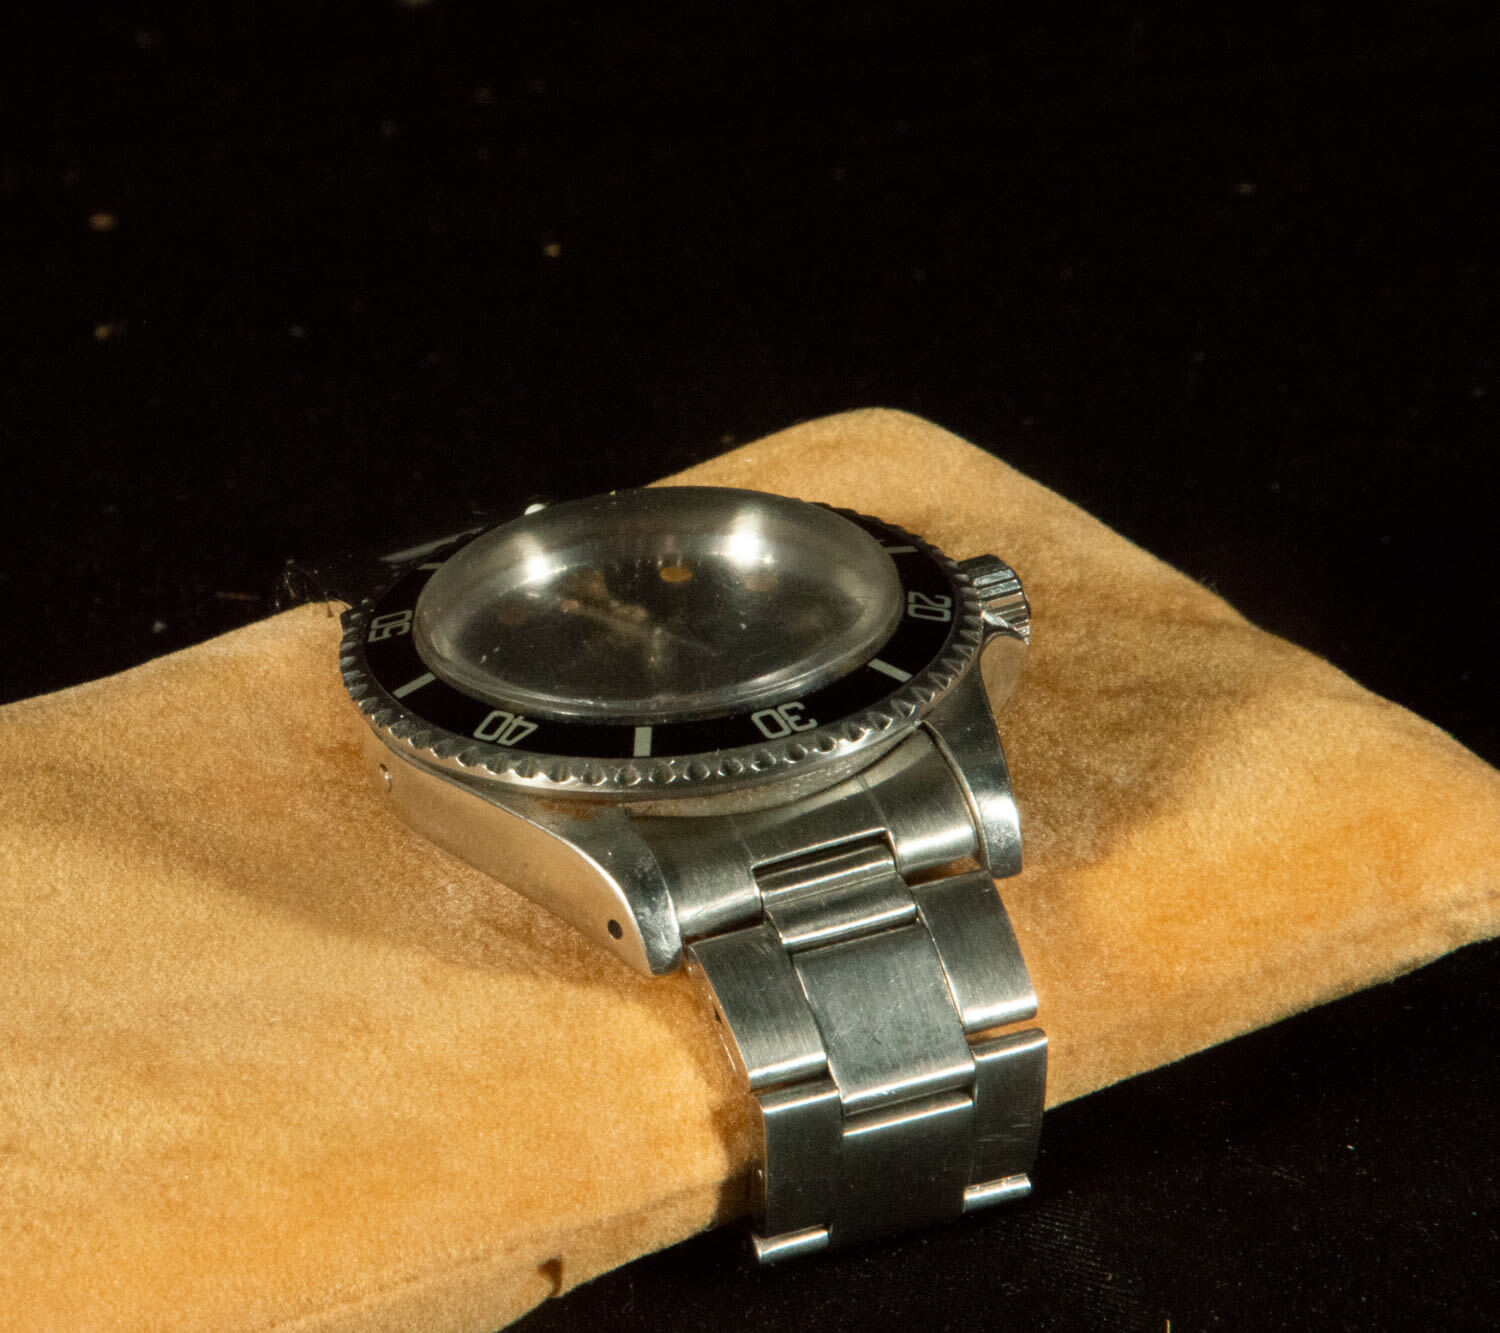 Rare Collector's Vintage Rolex "Double Red" Sea Dweller model 1665 in steel, 1970s - Image 3 of 10